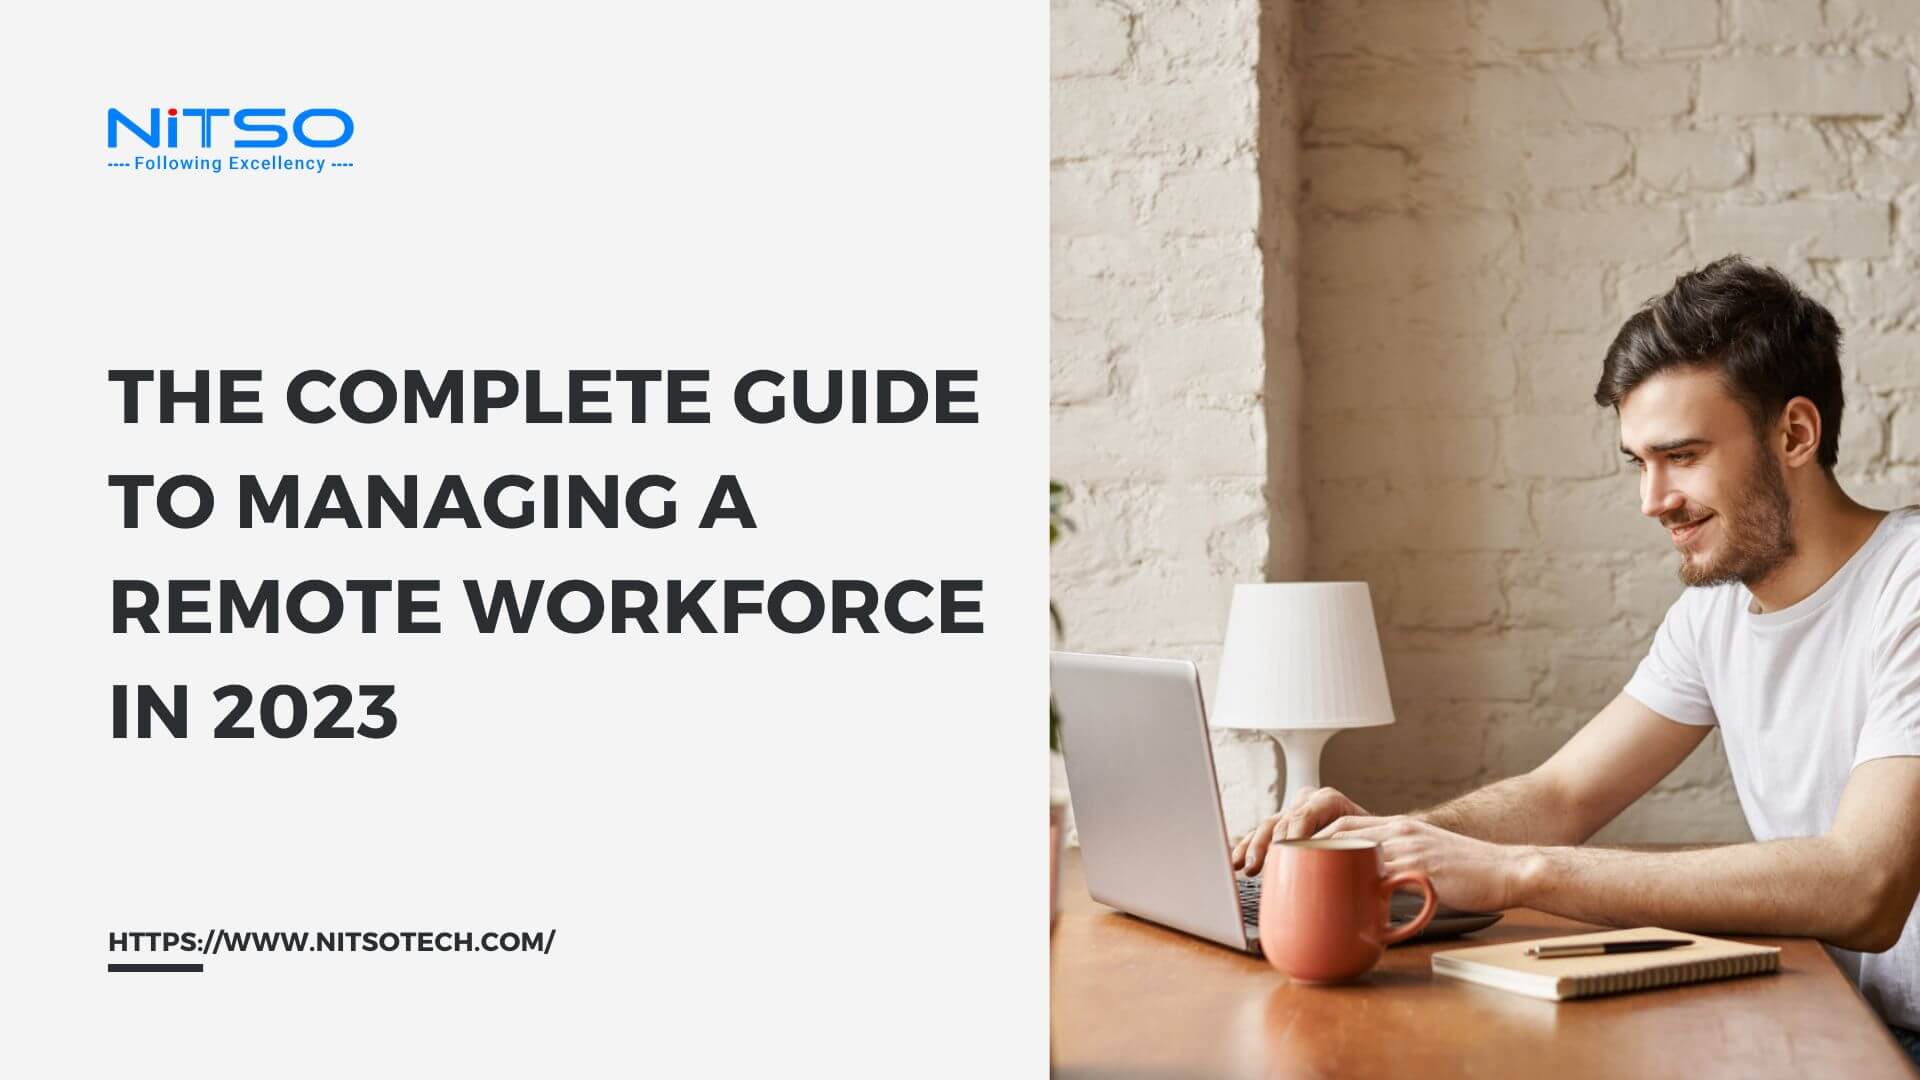 6 Tips to Successfully Manage Your Remote Workforce